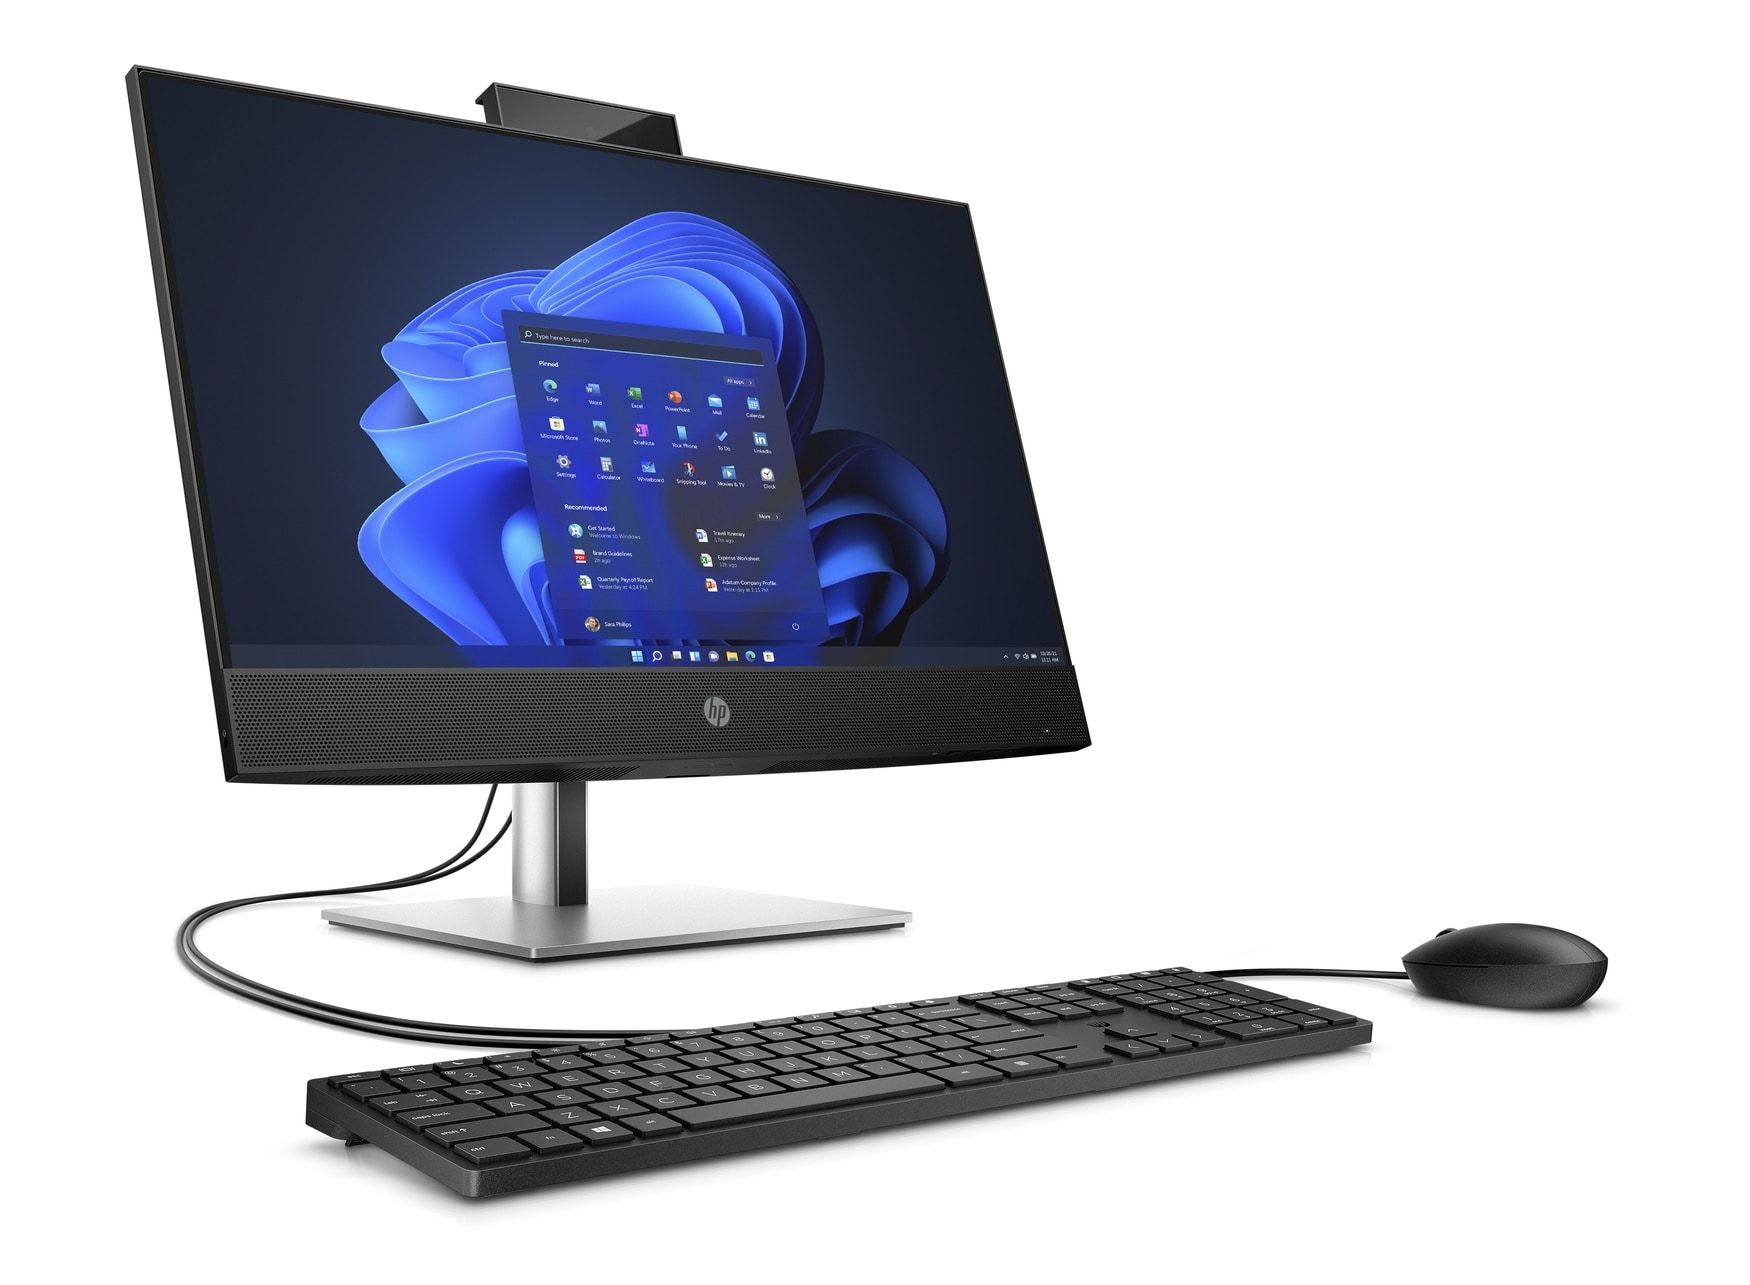 HP ProOne 440 G9 AiO|i5-13500T|16GB DDR4 3200 1DM|512GB SSD|23.8 FHD nonTouch|Height Adjustable Stand|Intel UHD|Win11Pro|nOD|WiFI6e+BT5.3|KB[HP 320K]+mouse[HP 125]|120W AC|Silver Black|2Y NBD_2